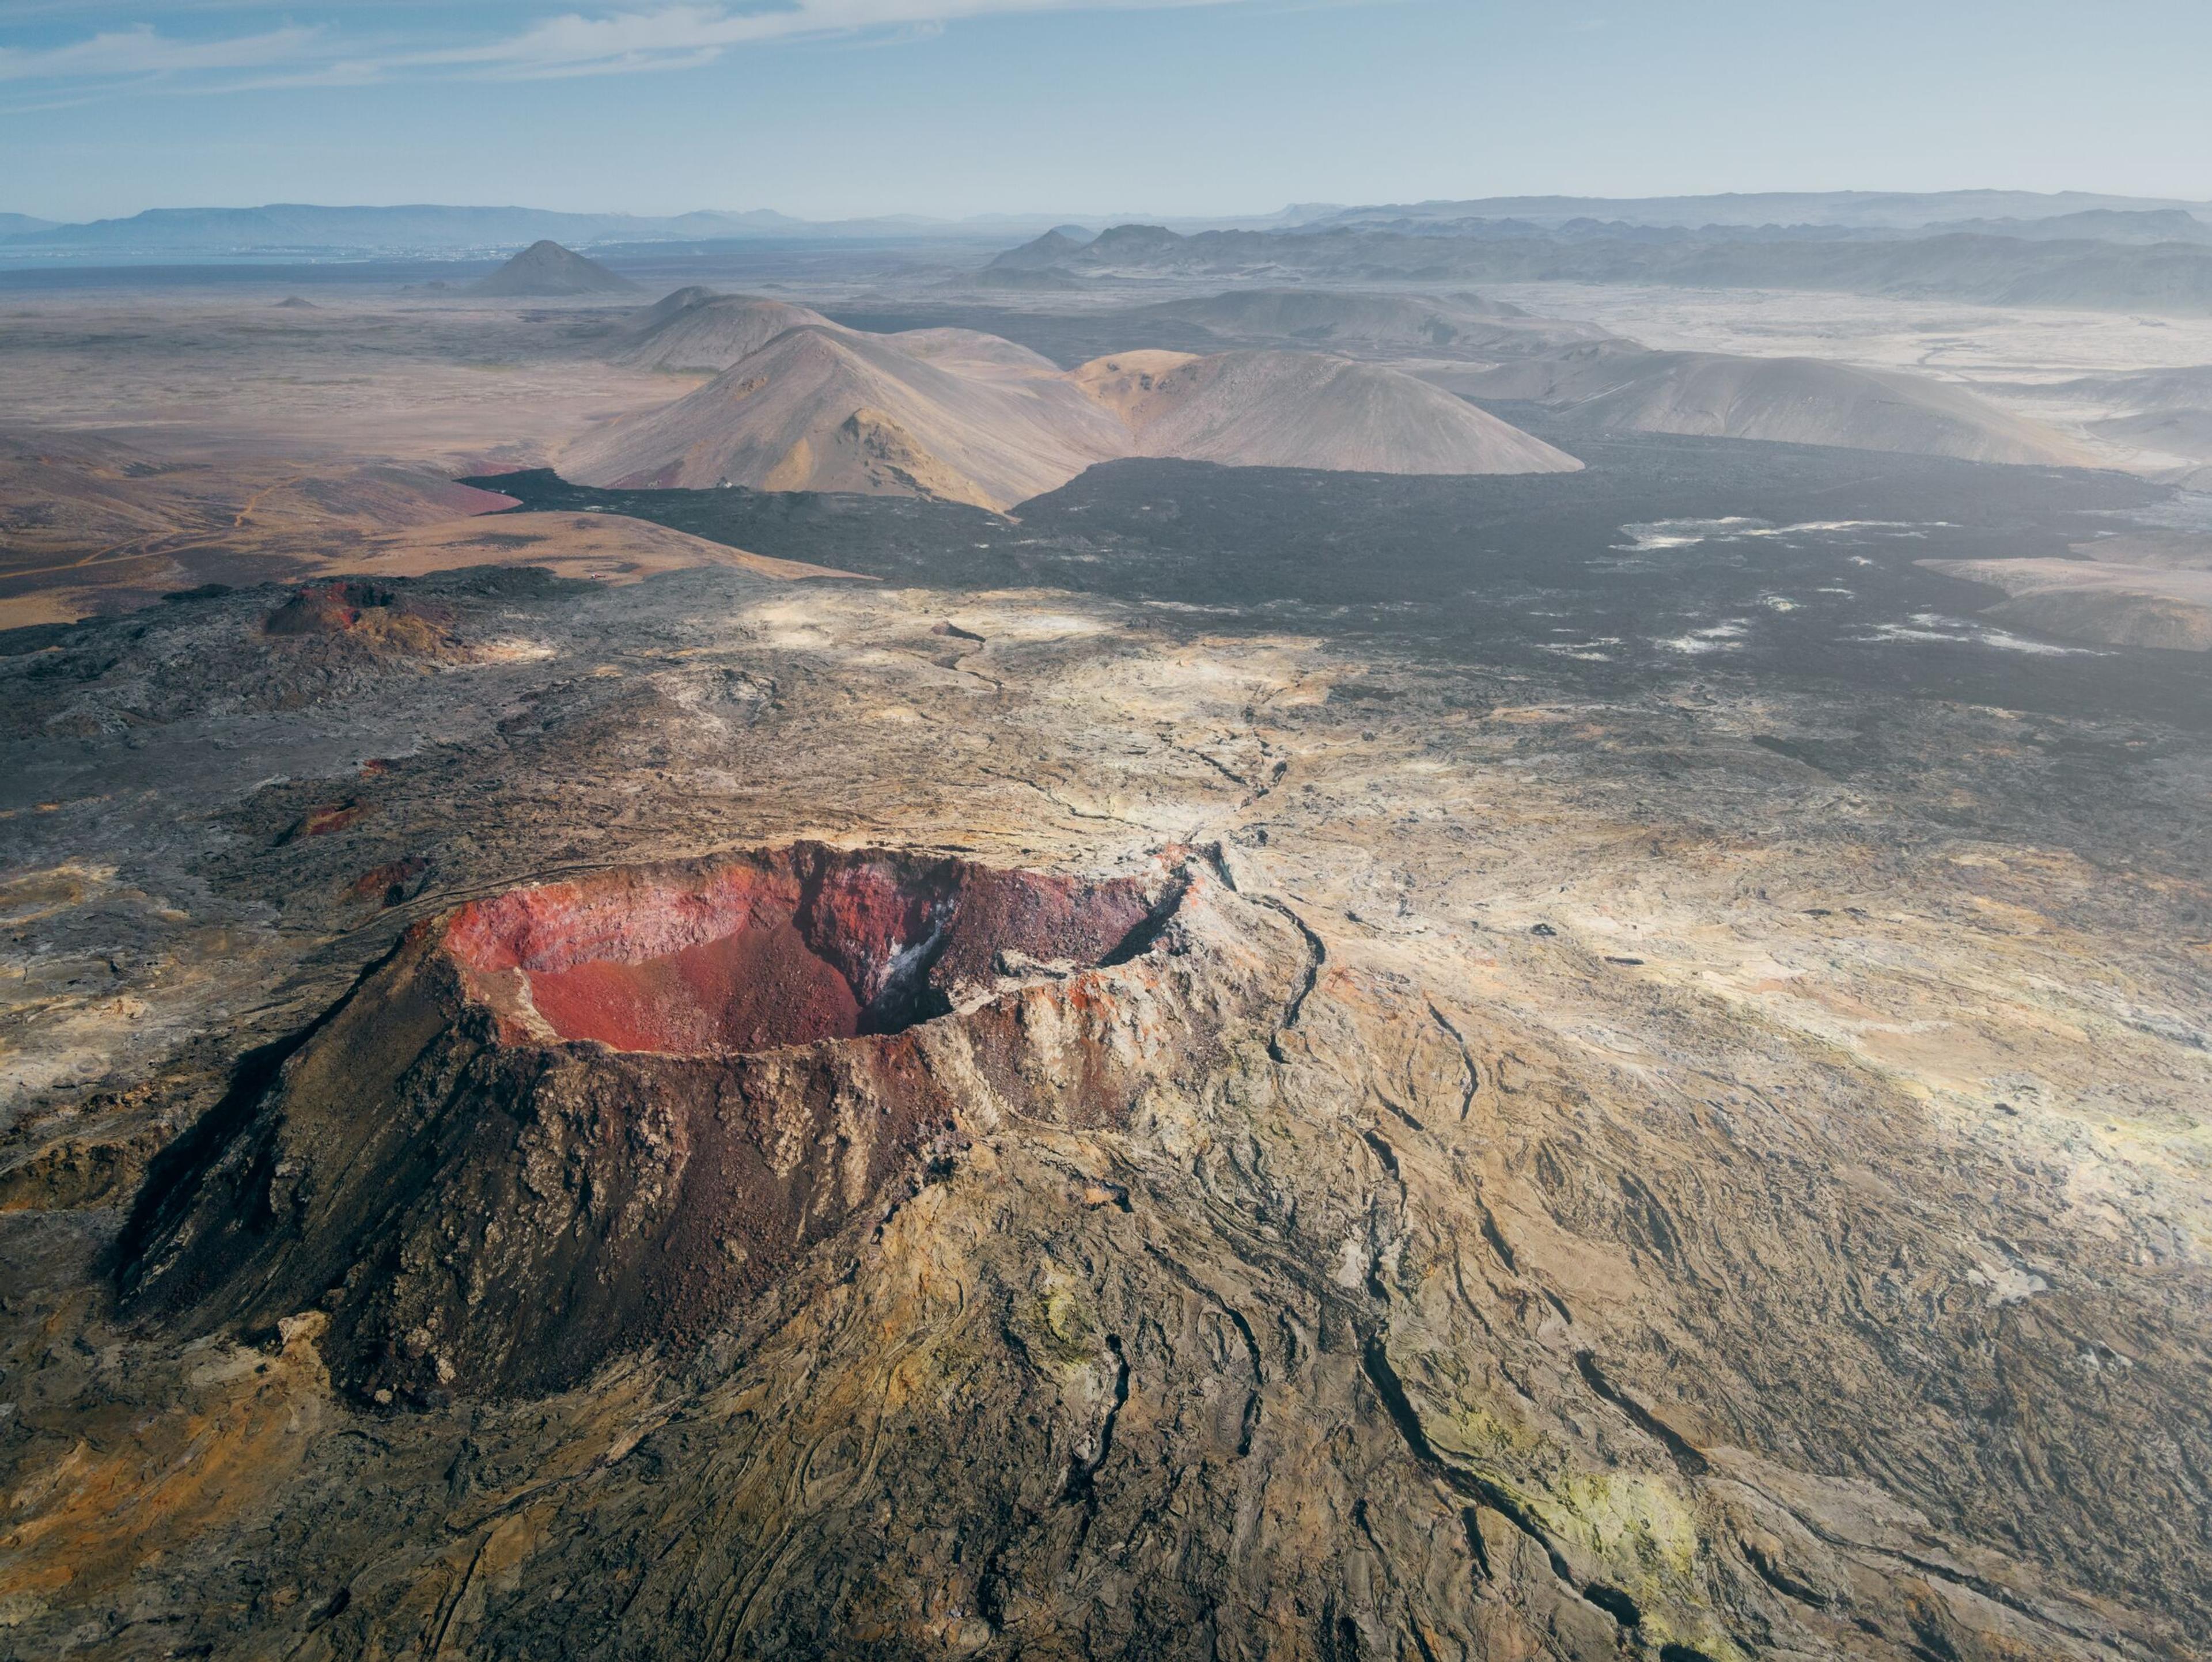 Aerial view of Fagradalsfjall. Volcanic caldera on the foreground.